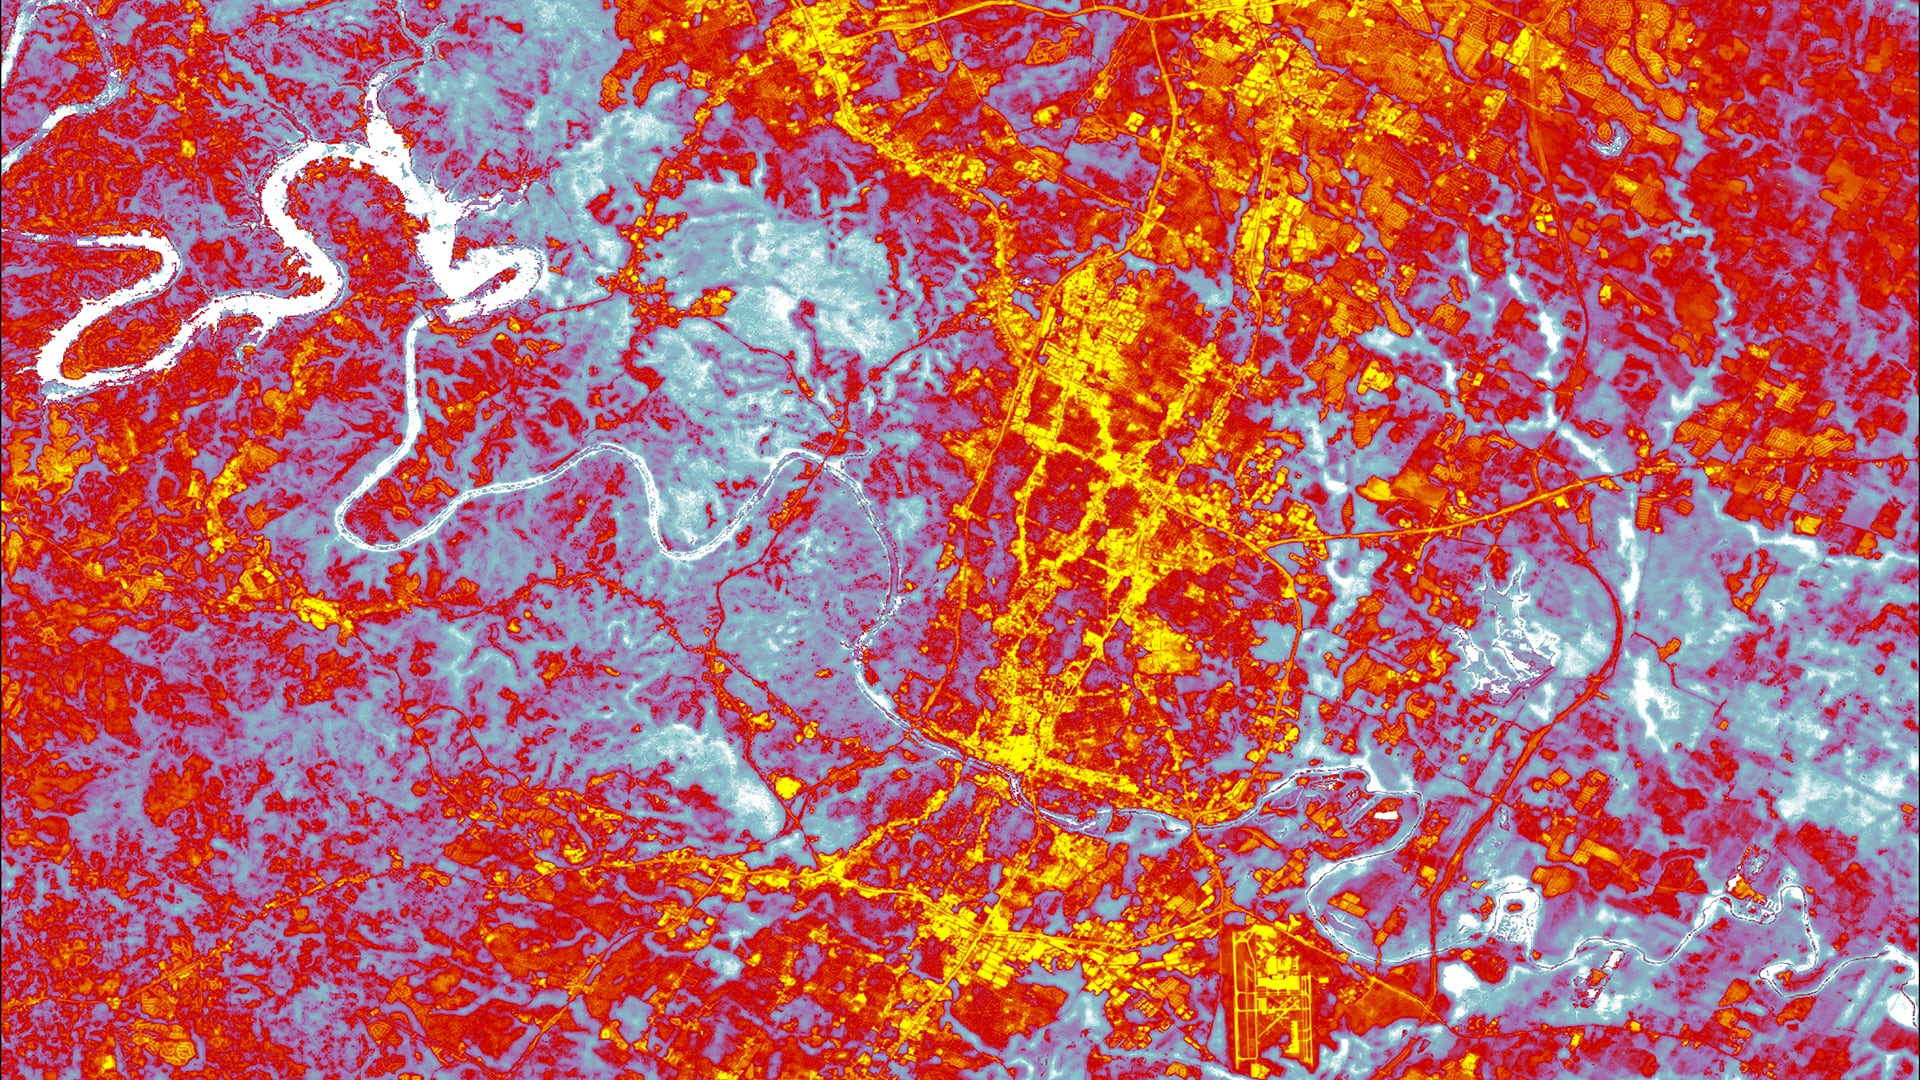 Daytime average land surface temperatures calculated from April-September, 2015 – 2020 Landsat 8 TIRS data. The image shows downtown Austin, Texas, the surrounding Hill Country, and Lake Travis. Red and yellow values represent highest temperatures, while blue and white values depict cooler areas, including the Colorado River system that runs through the city. Yellow areas highlight built-up features associated with higher temperatures, suggesting where partners should focus their efforts on mitigating heat hazards for vulnerable communities.Keywords: Urban Heat, Land Surface Temperature, Landsat8, Alexa Lopez, Will Peters, Margaret McCall, James Sanders